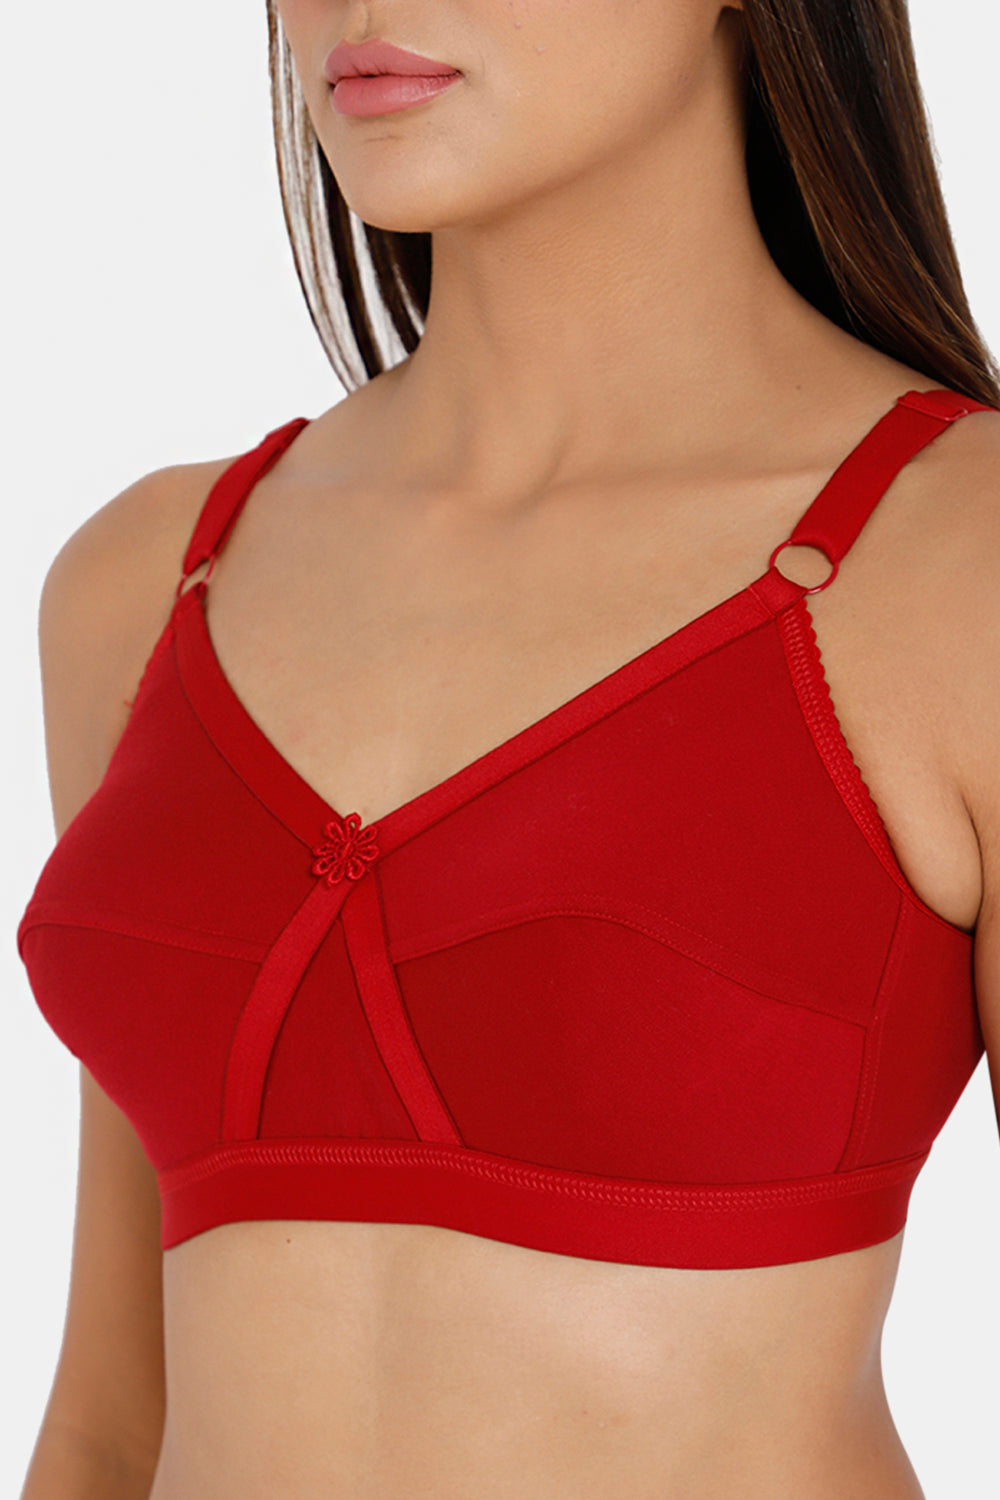 Intimacy Bra Red Shade - KRISS KROSS Size   32B Color Red